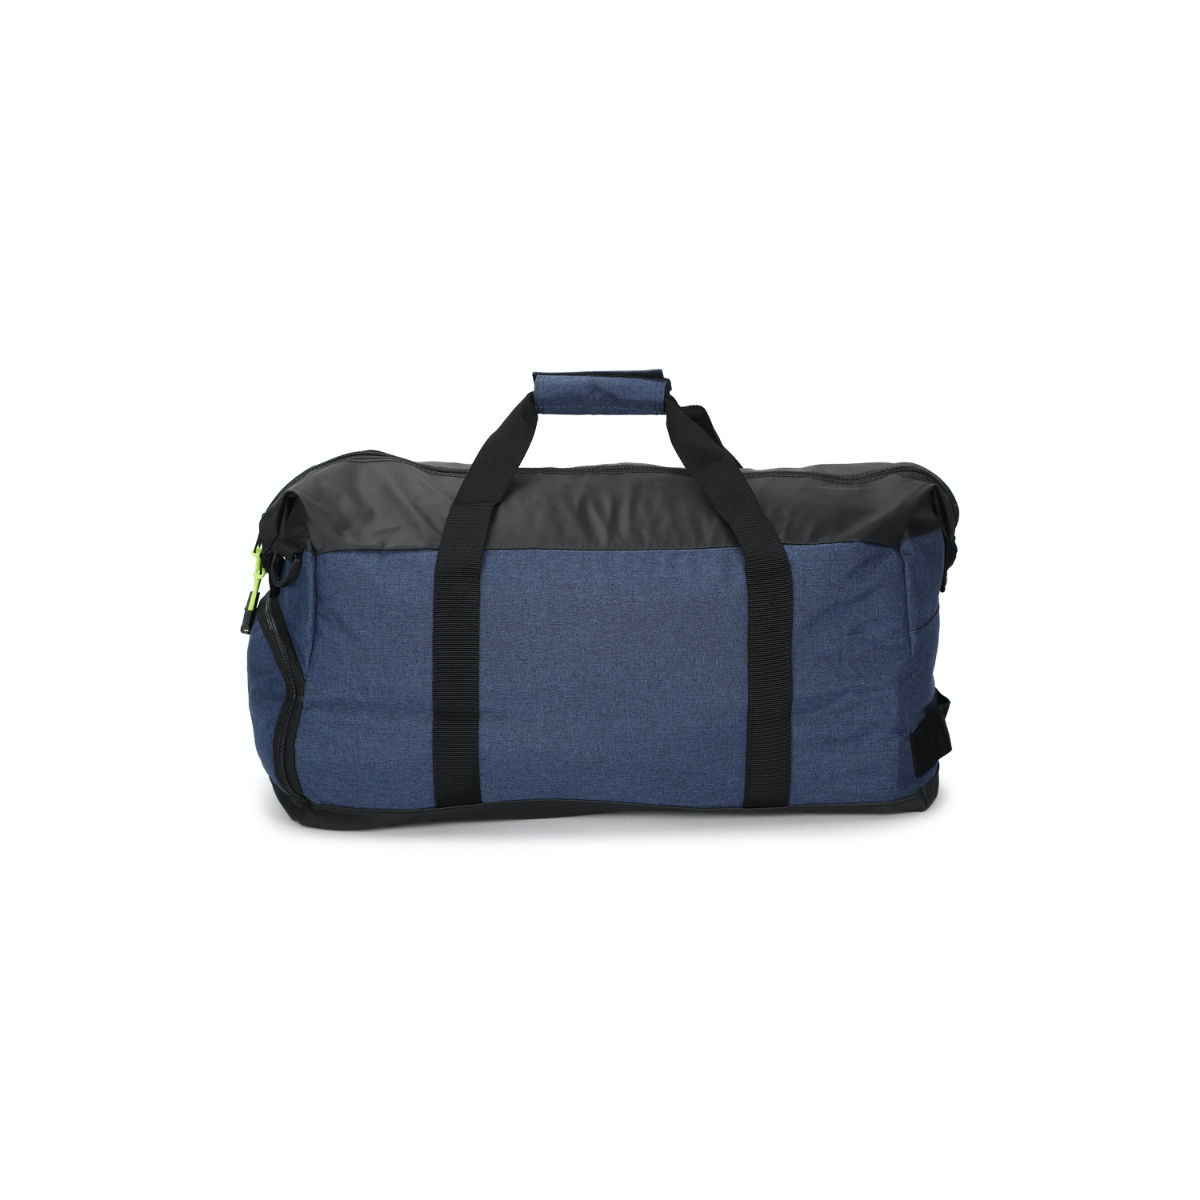 peter england travel bags